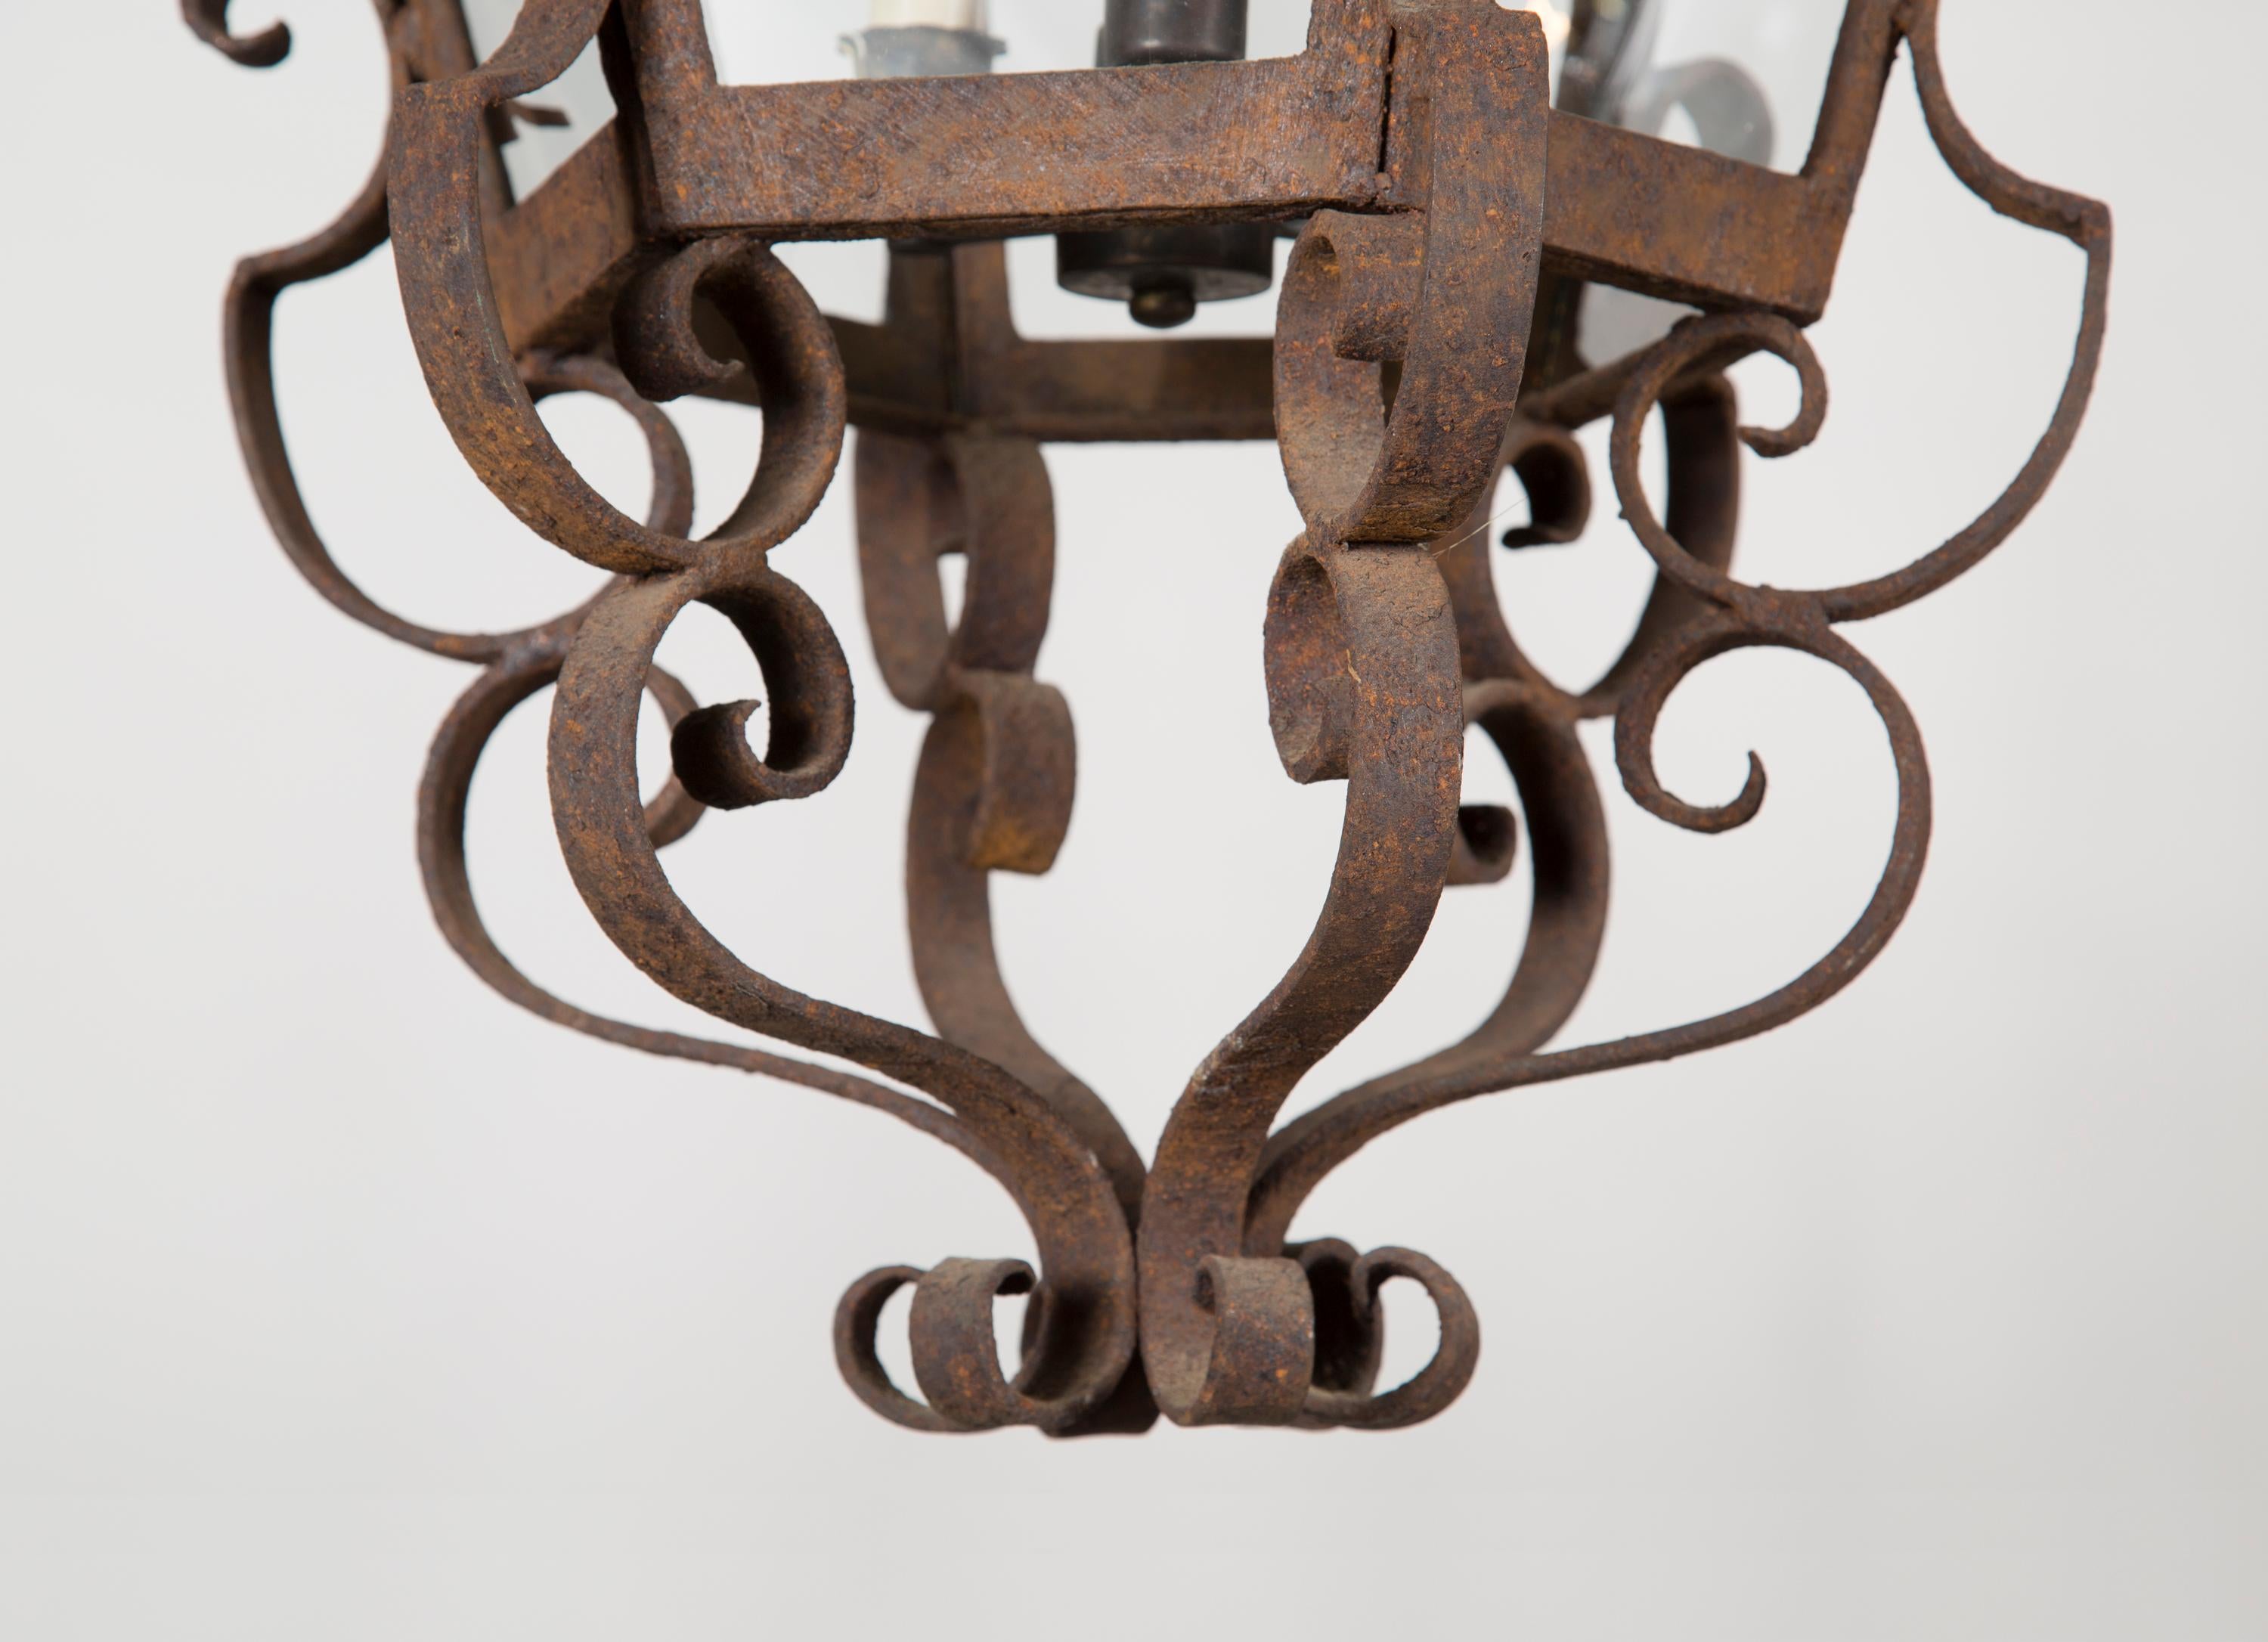 French Hexagonal Wrought Iron Hanging Lantern, 19th Century For Sale 1